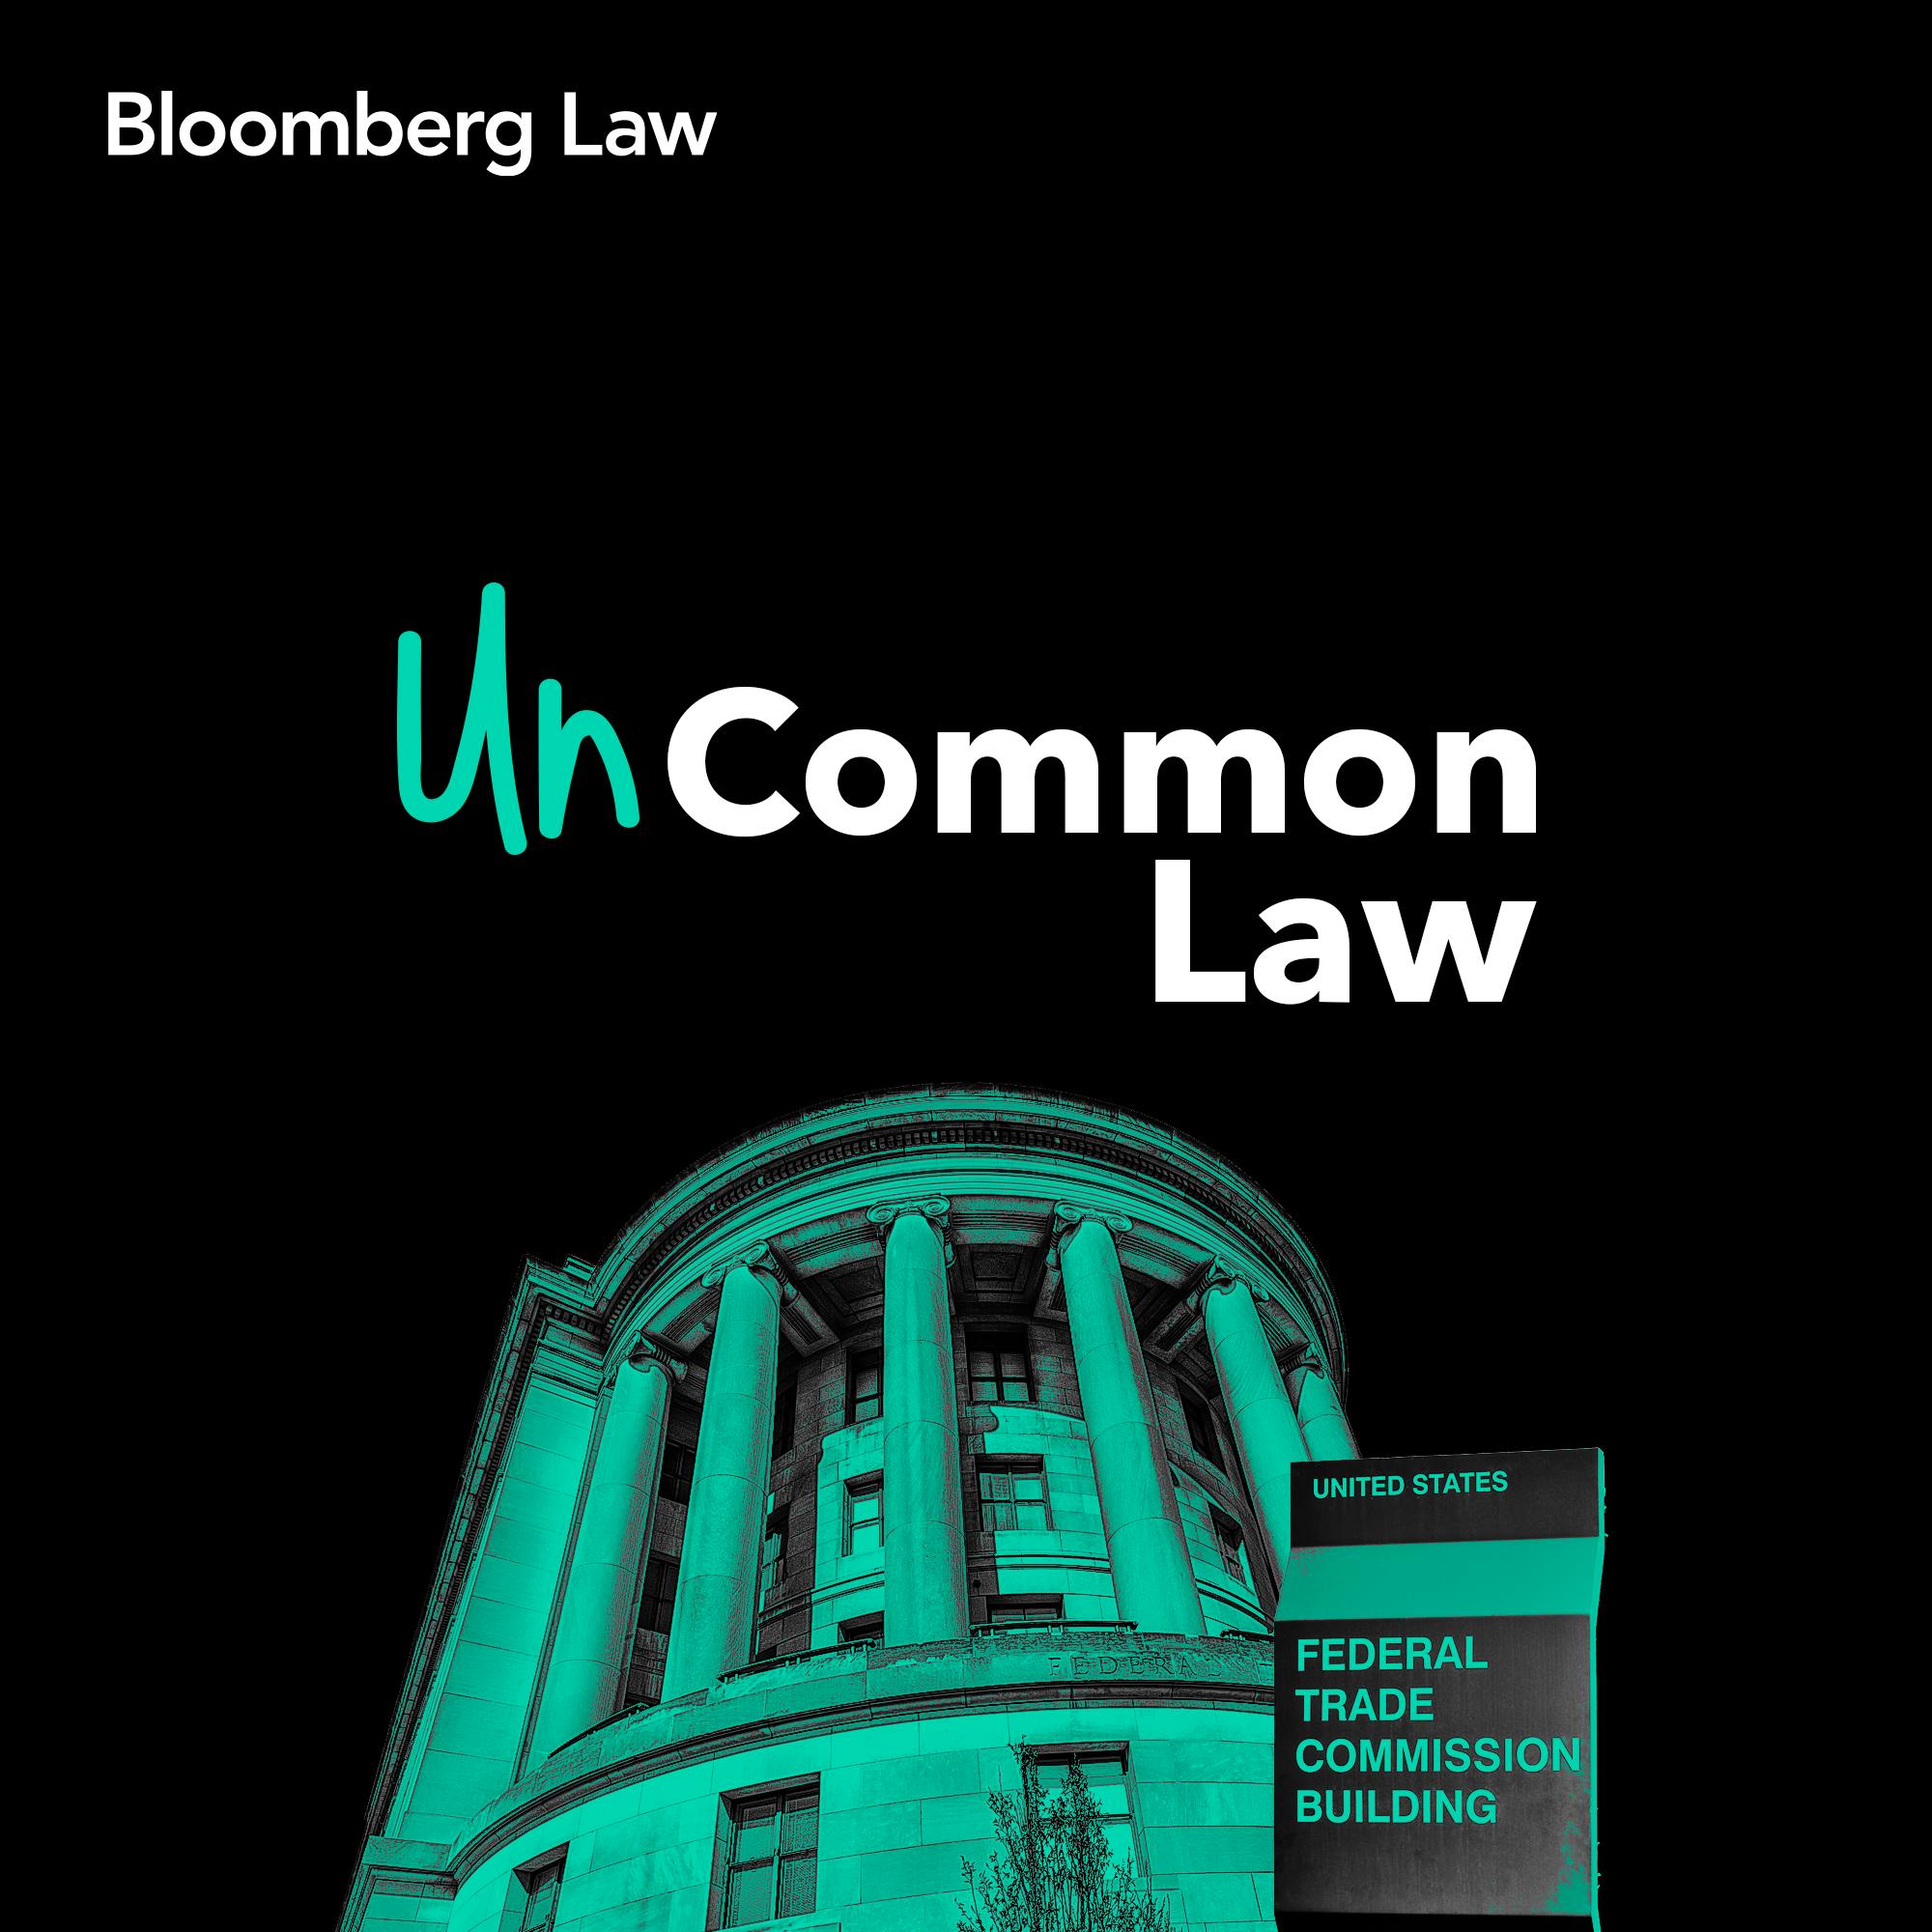 5. If Lina Khan's FTC Bans Noncompete Clauses, What Happens Next?